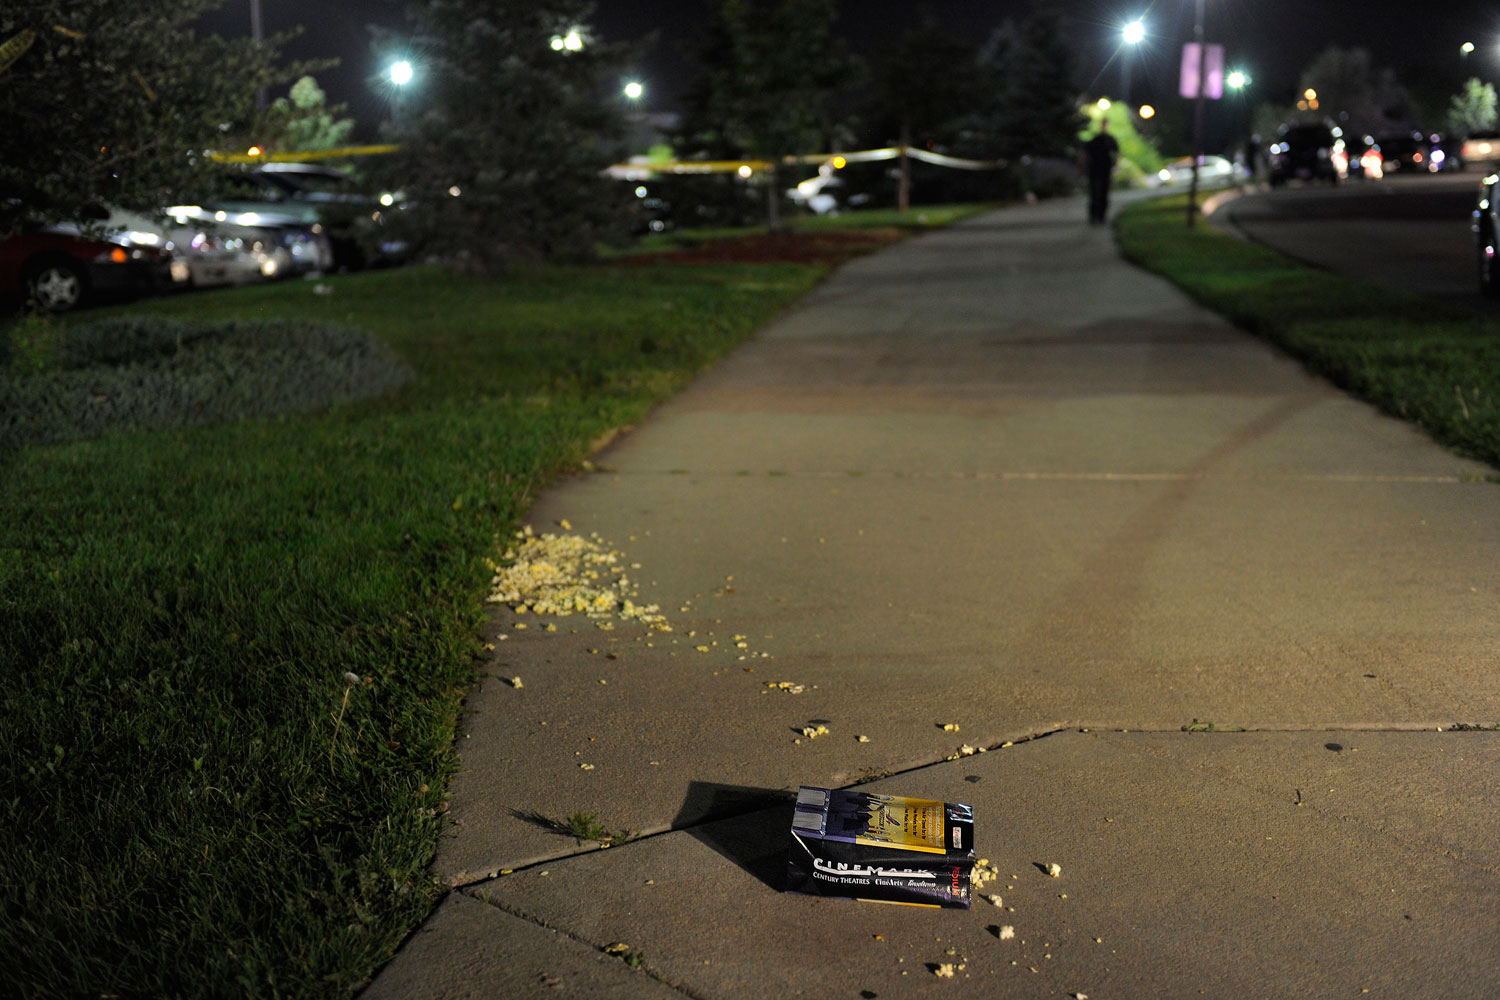 July 20, 2012. Aurora, Colorado, Unites States: A bag of popcorn was abandoned outside an Aurora theatre where a gunmen opened fire on moviegoers Friday morning. At least twelve people were killed when a lone shooter opened fire inside the theatre during a midnight screening of The Dark Knight Rises.